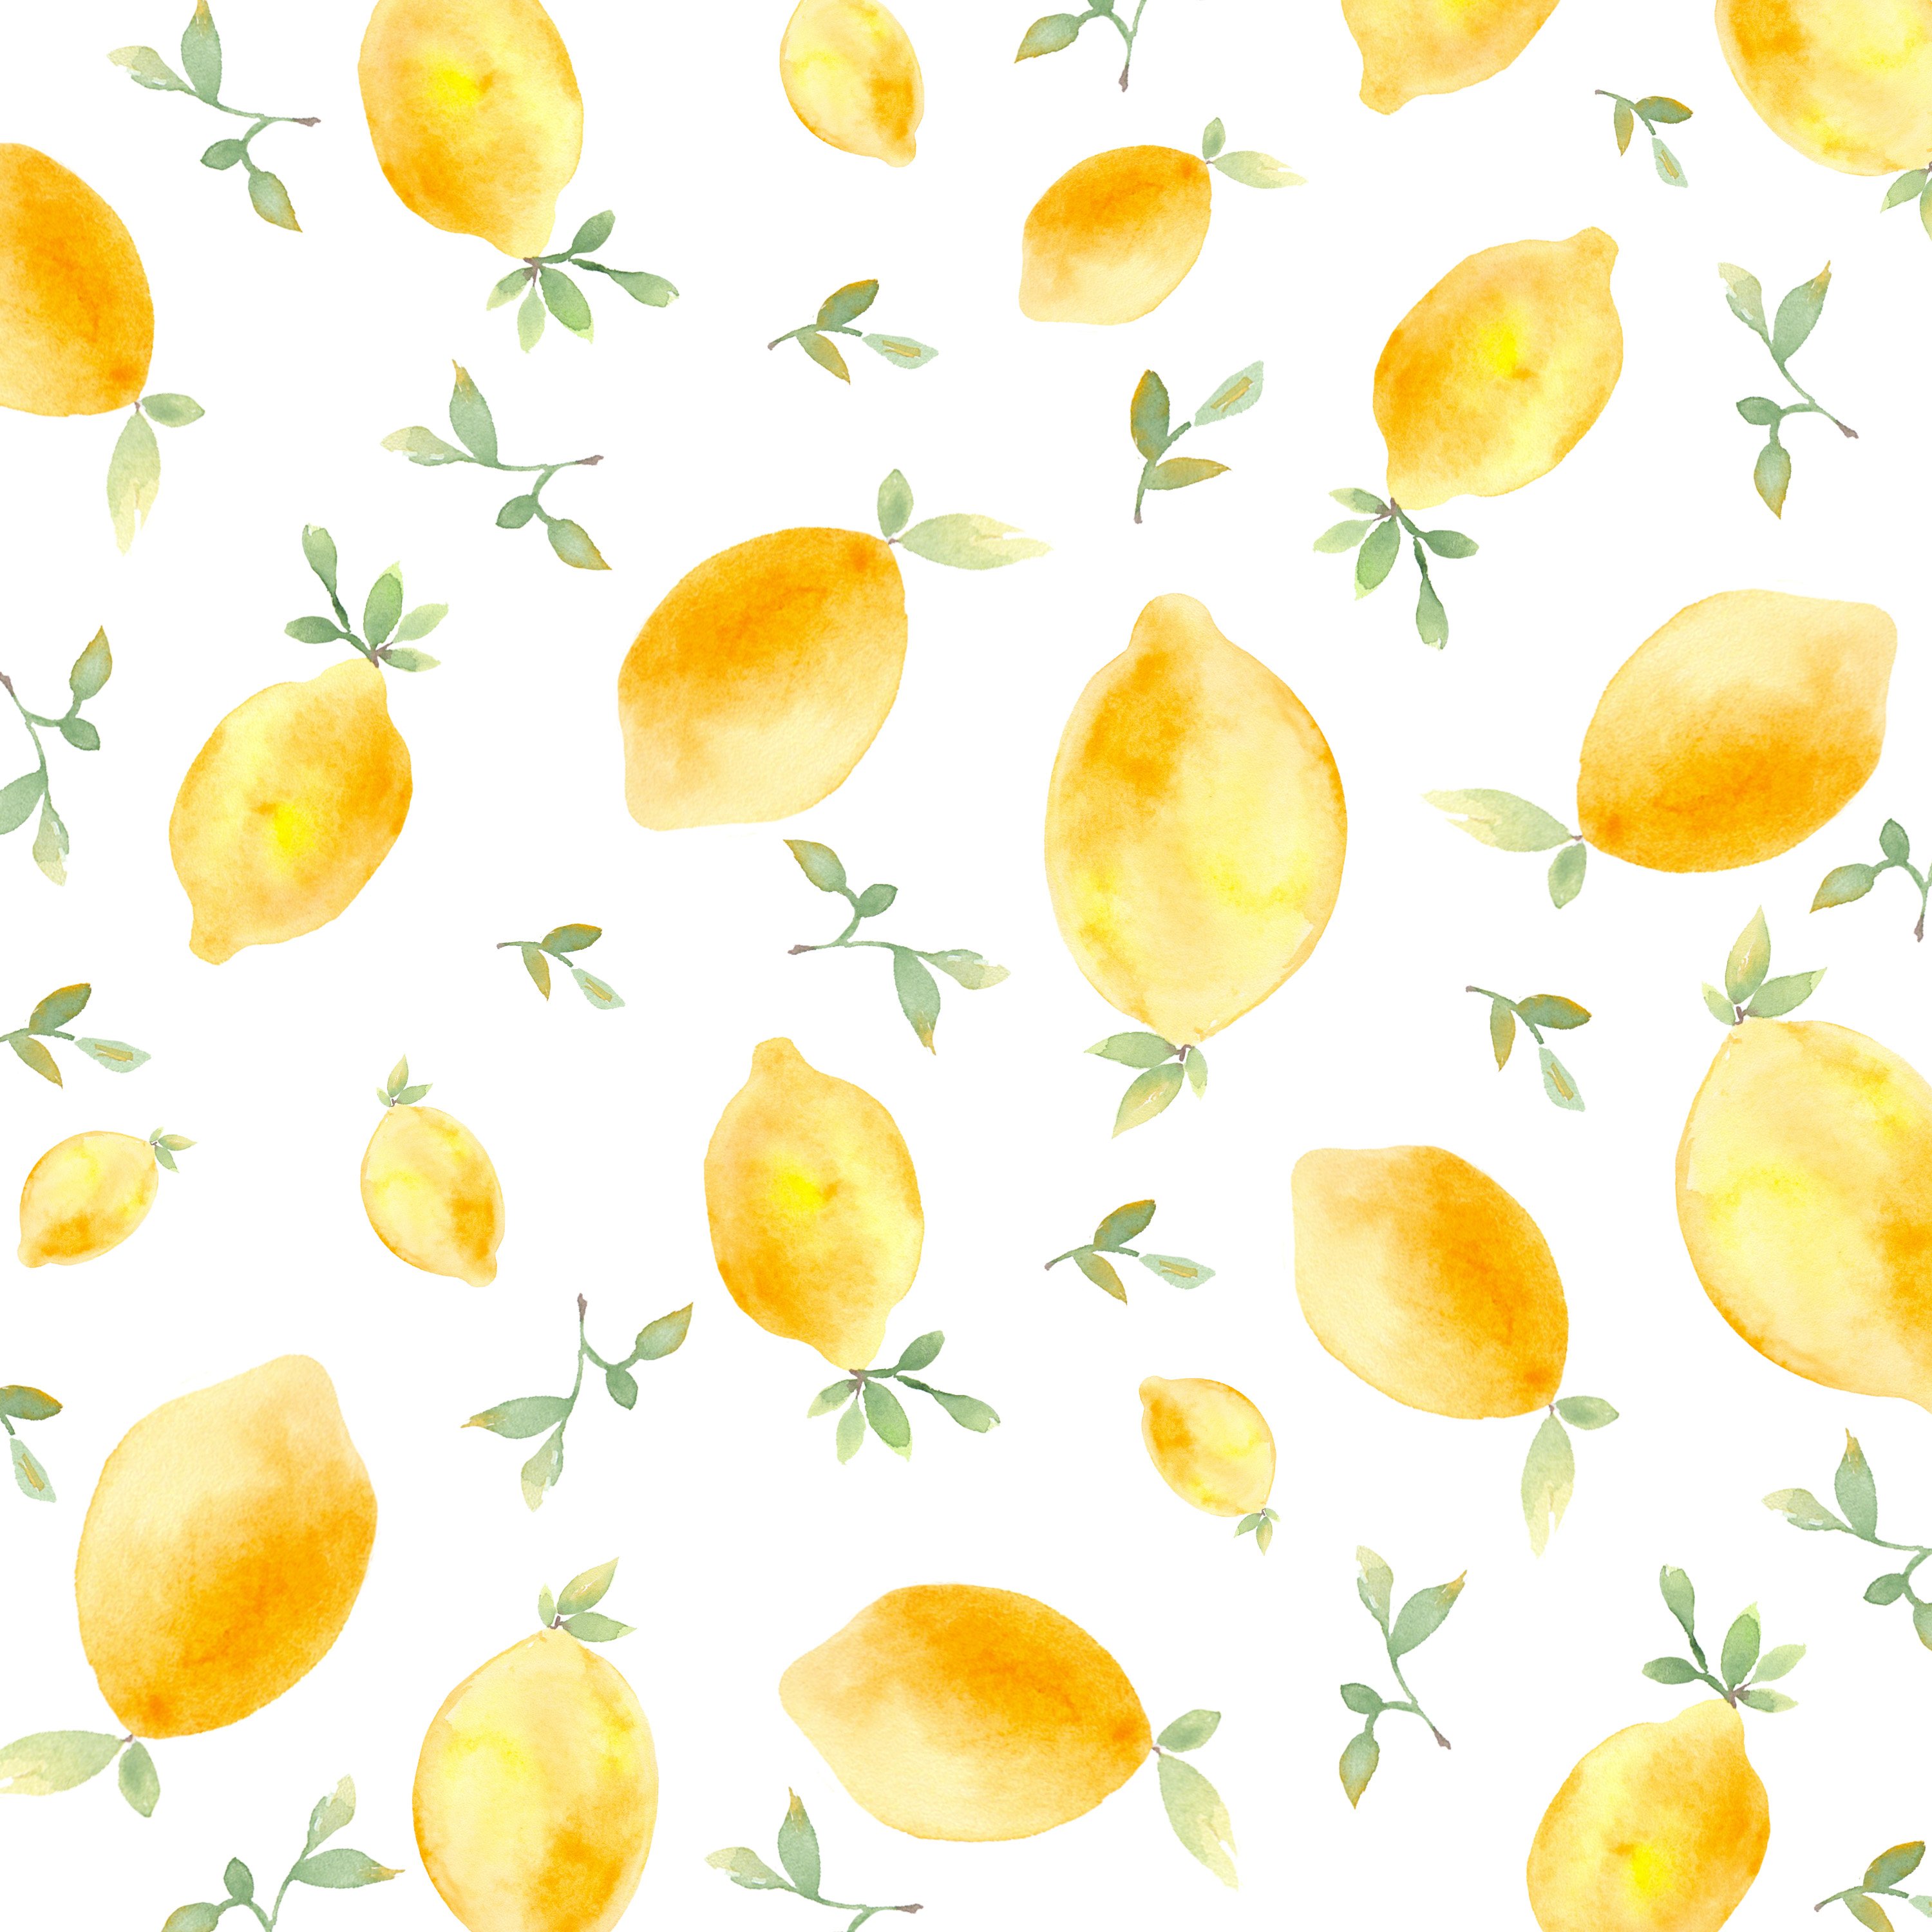 Watercolor lemon and peach patterns preview image.